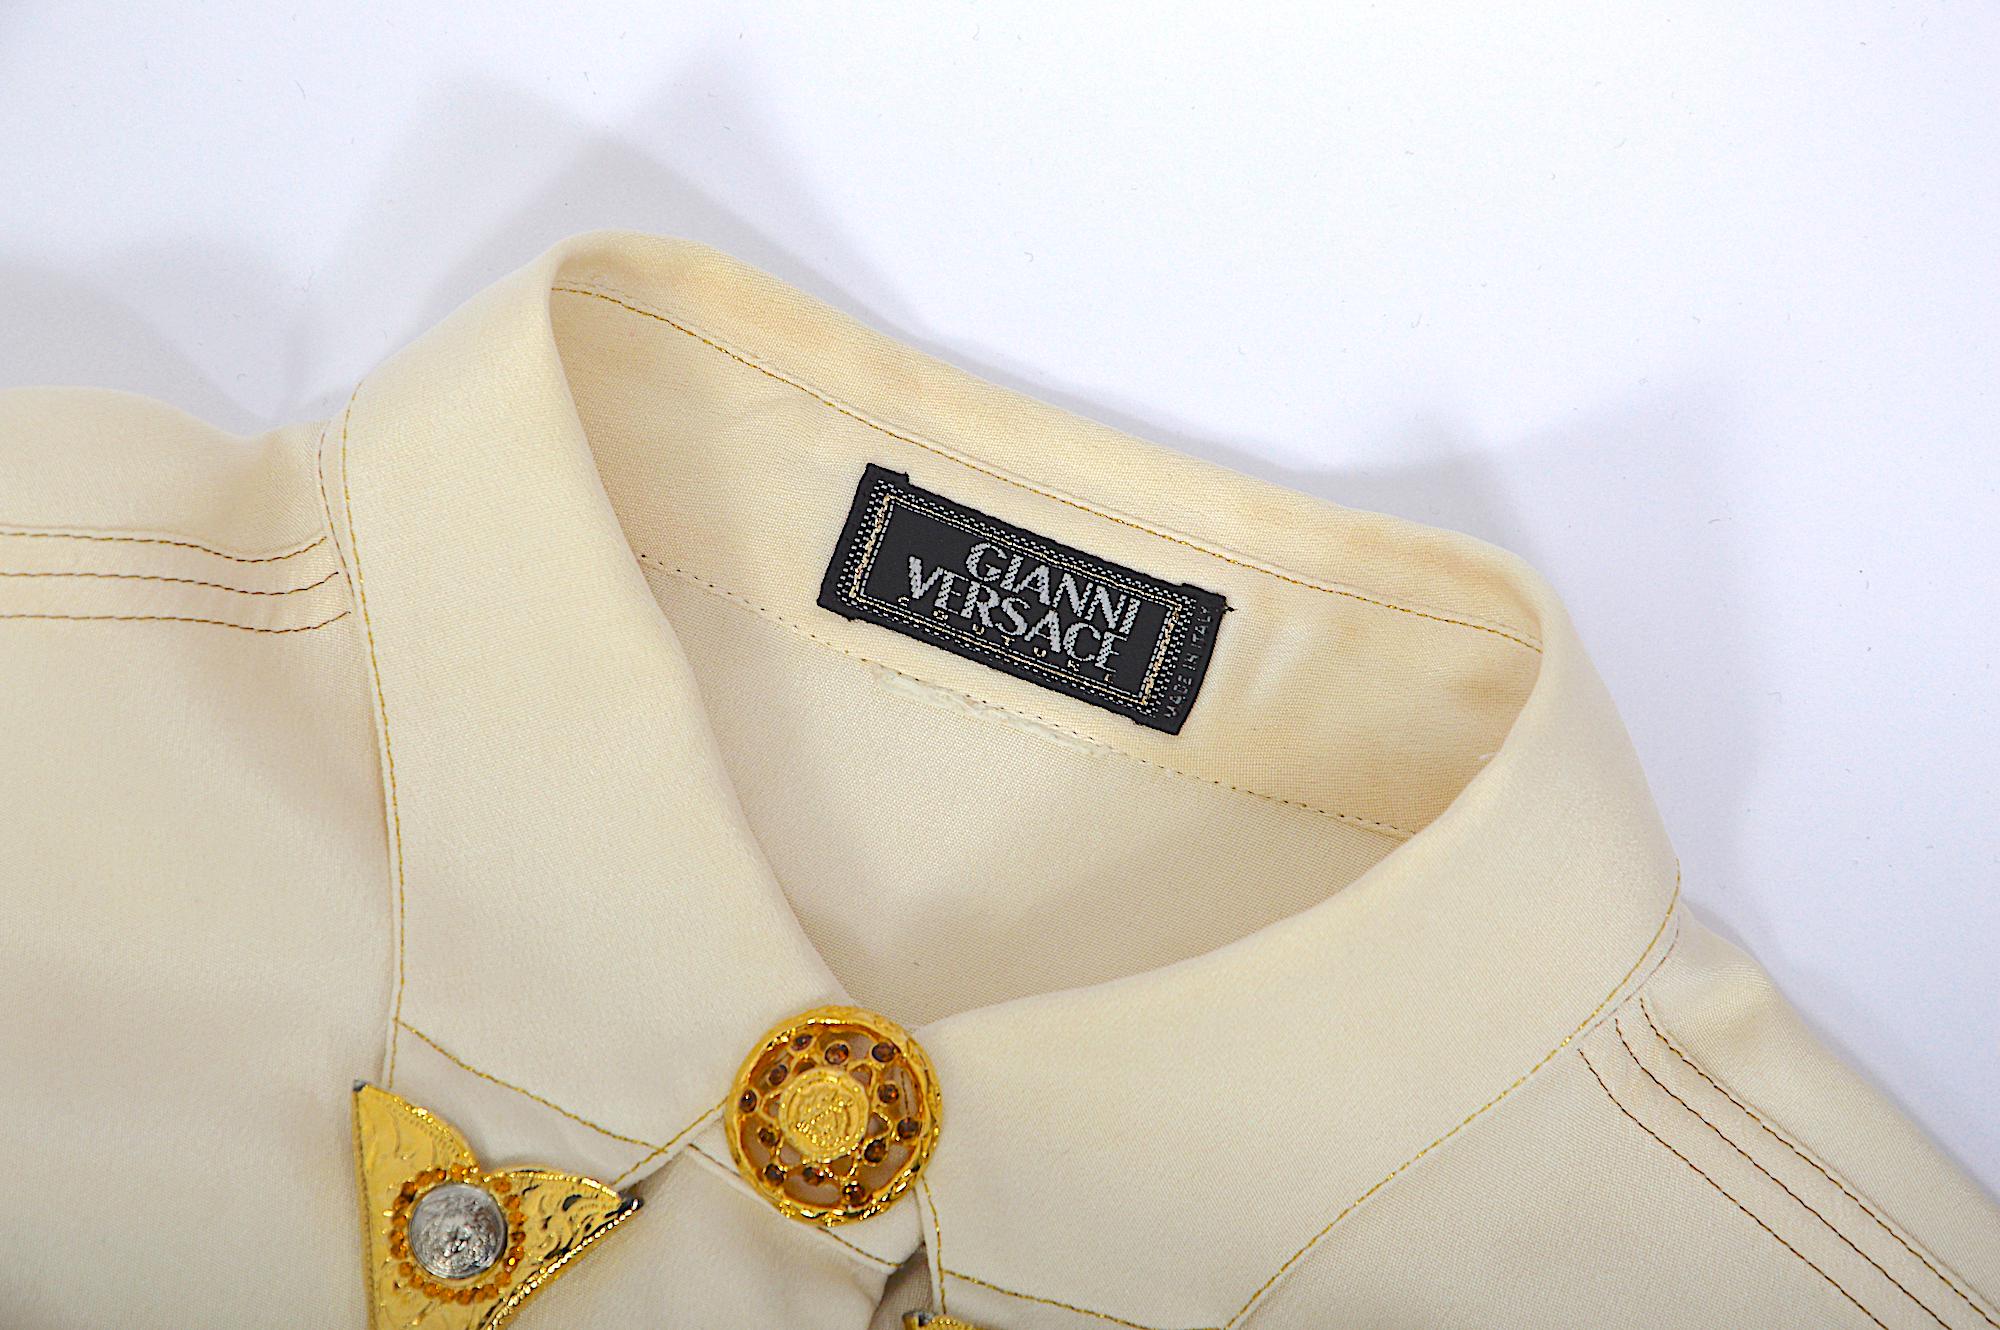 Gianni Versace couture F/W 1992 miss S&M show silk embellished western shirt 8